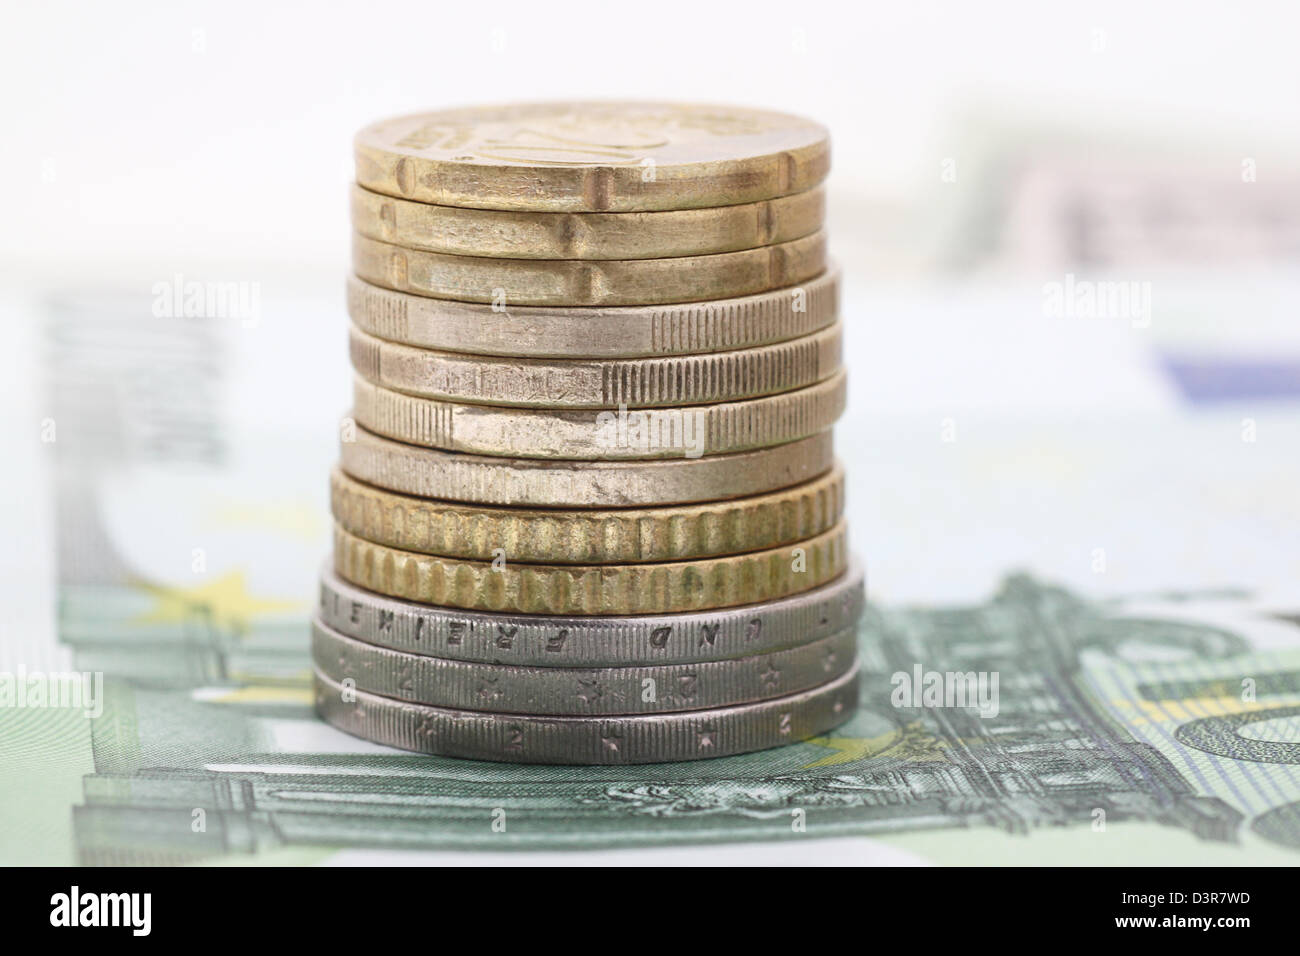 pile of euro coins on banknotes Stock Photo